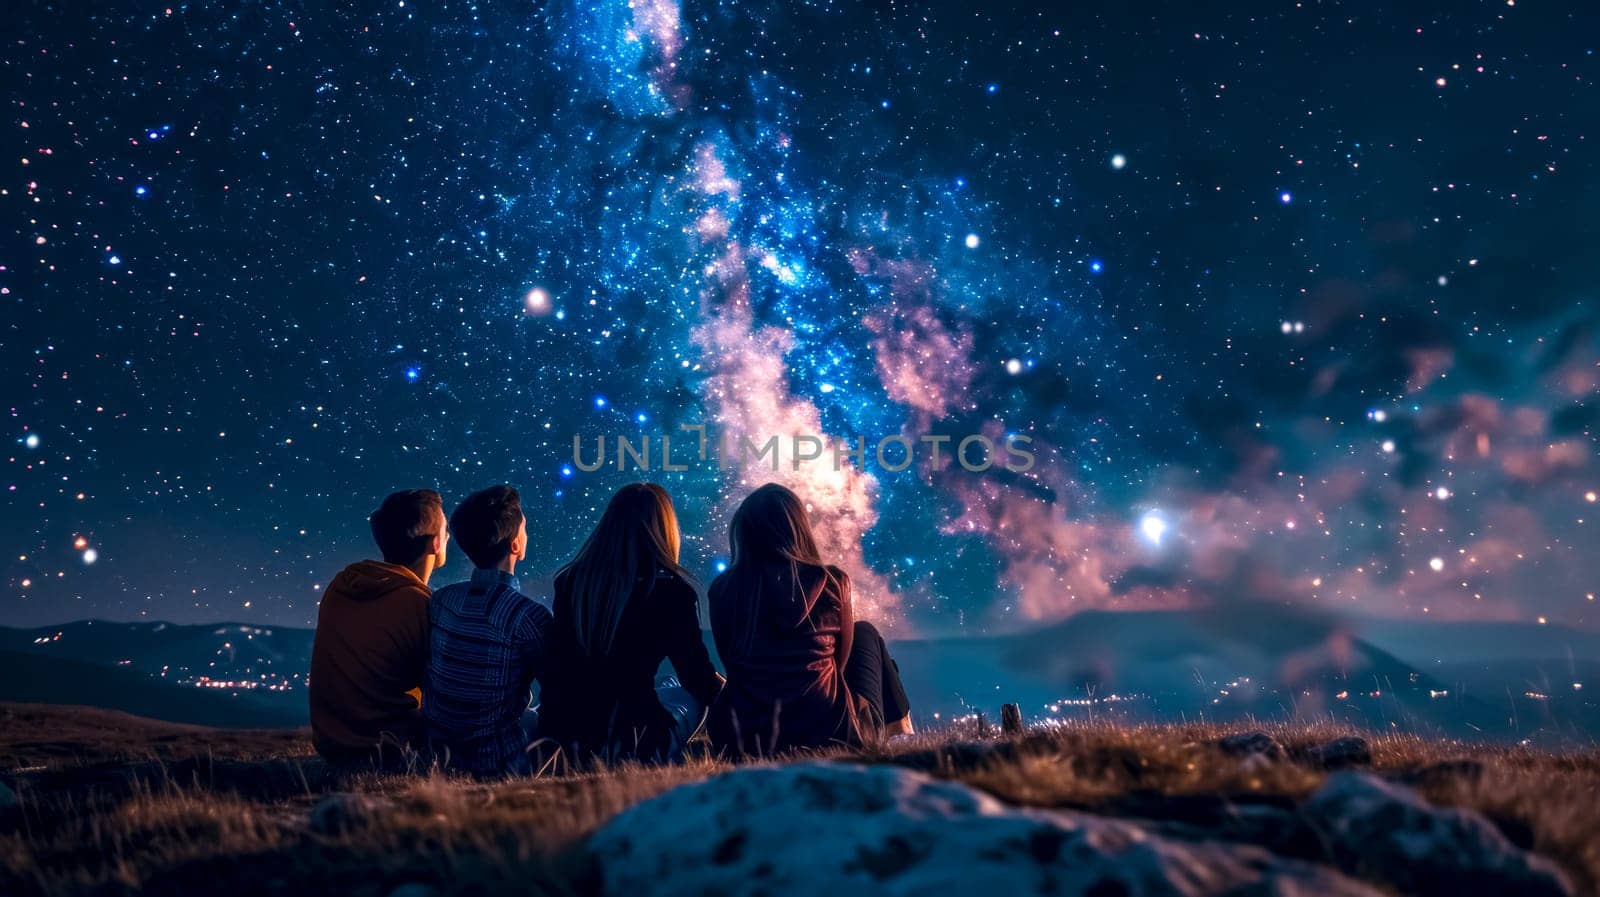 Four friends enjoy the breathtaking view of the milky way while sitting on a hill at night